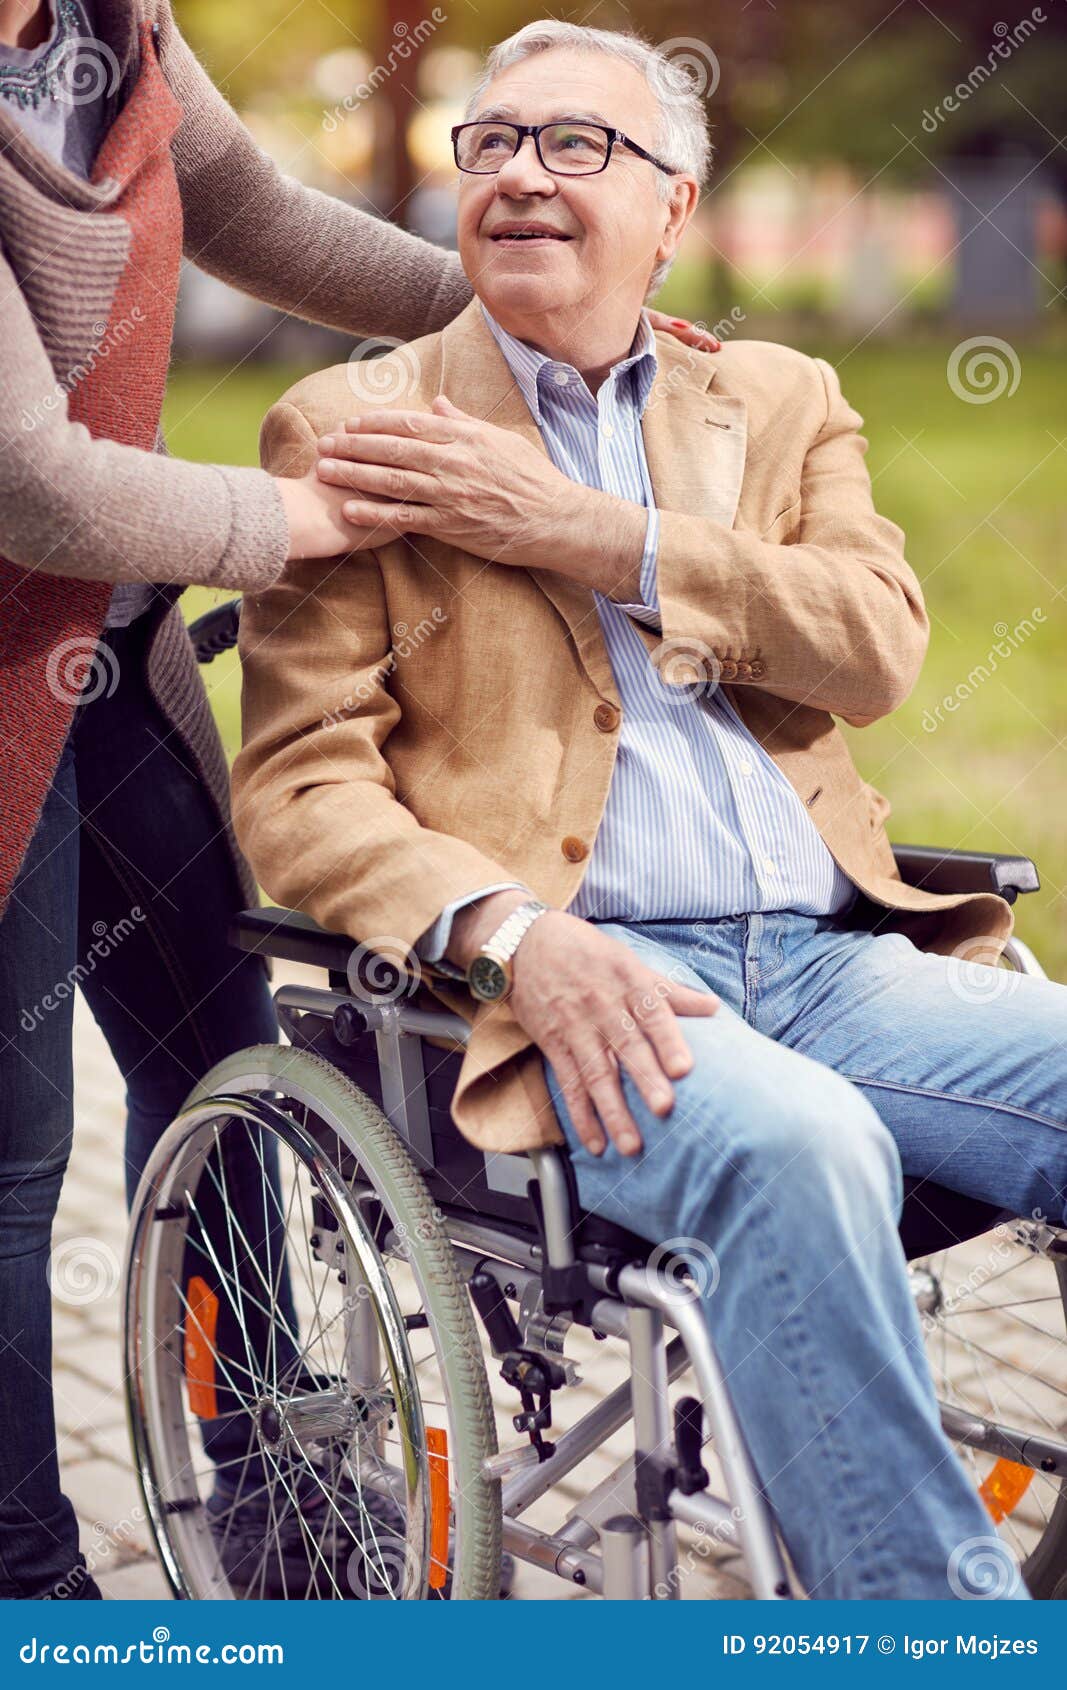 Disabled Positive Elderly Man in Wheelchair Stock Image - Image of hand ...